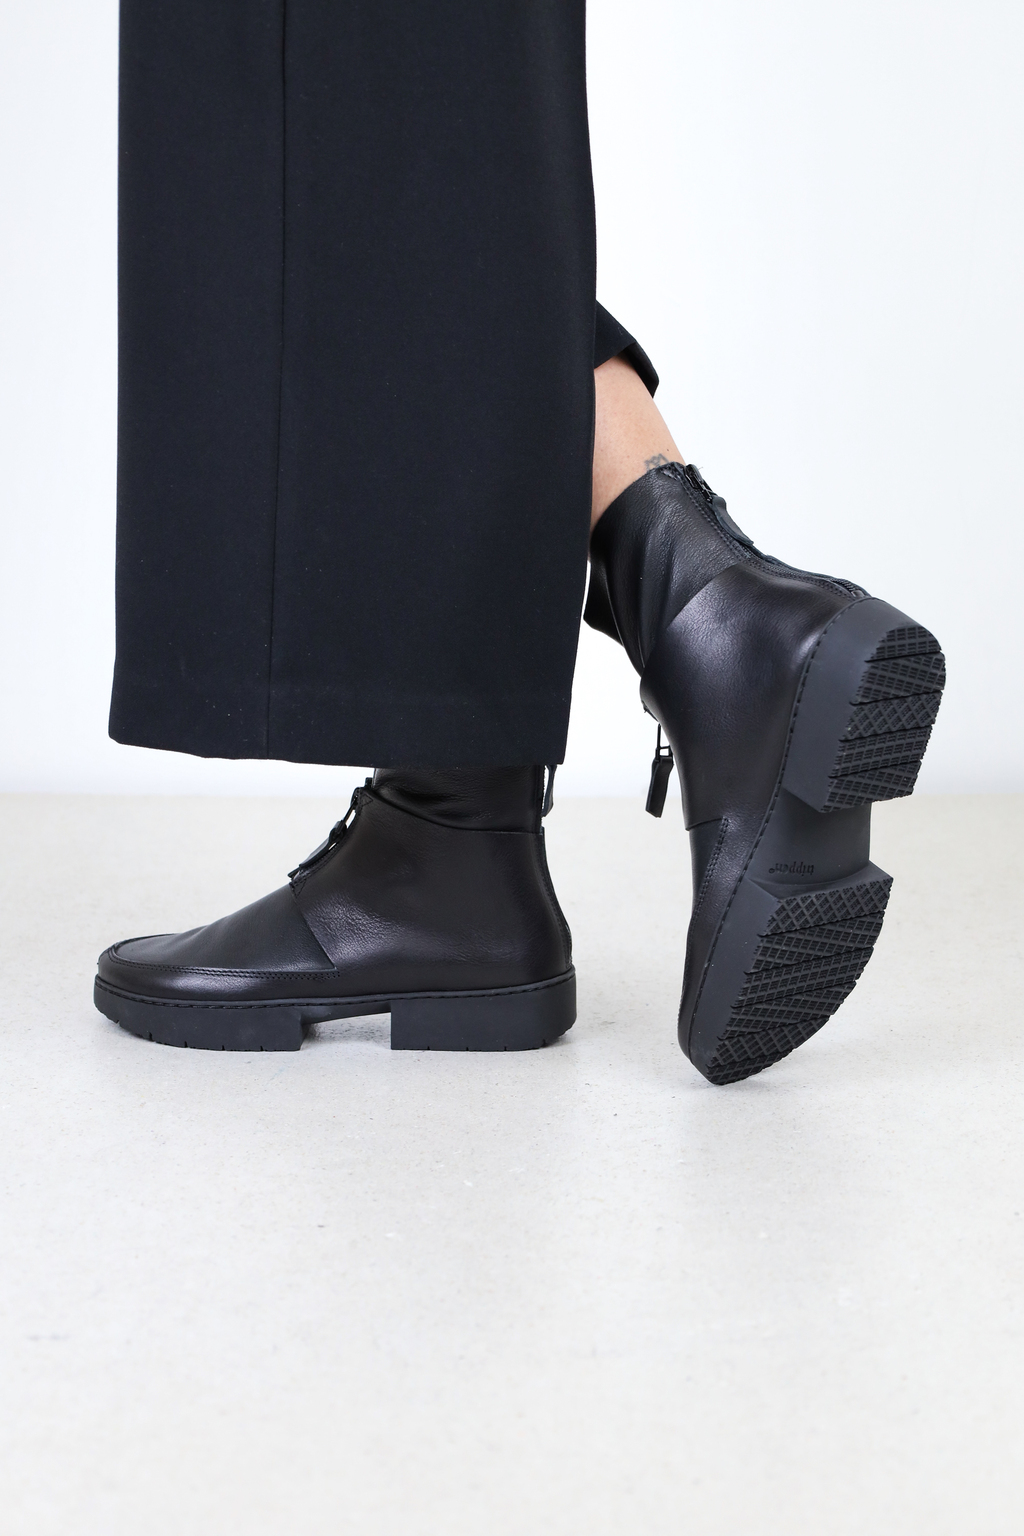 ARGO leather cut-out boots